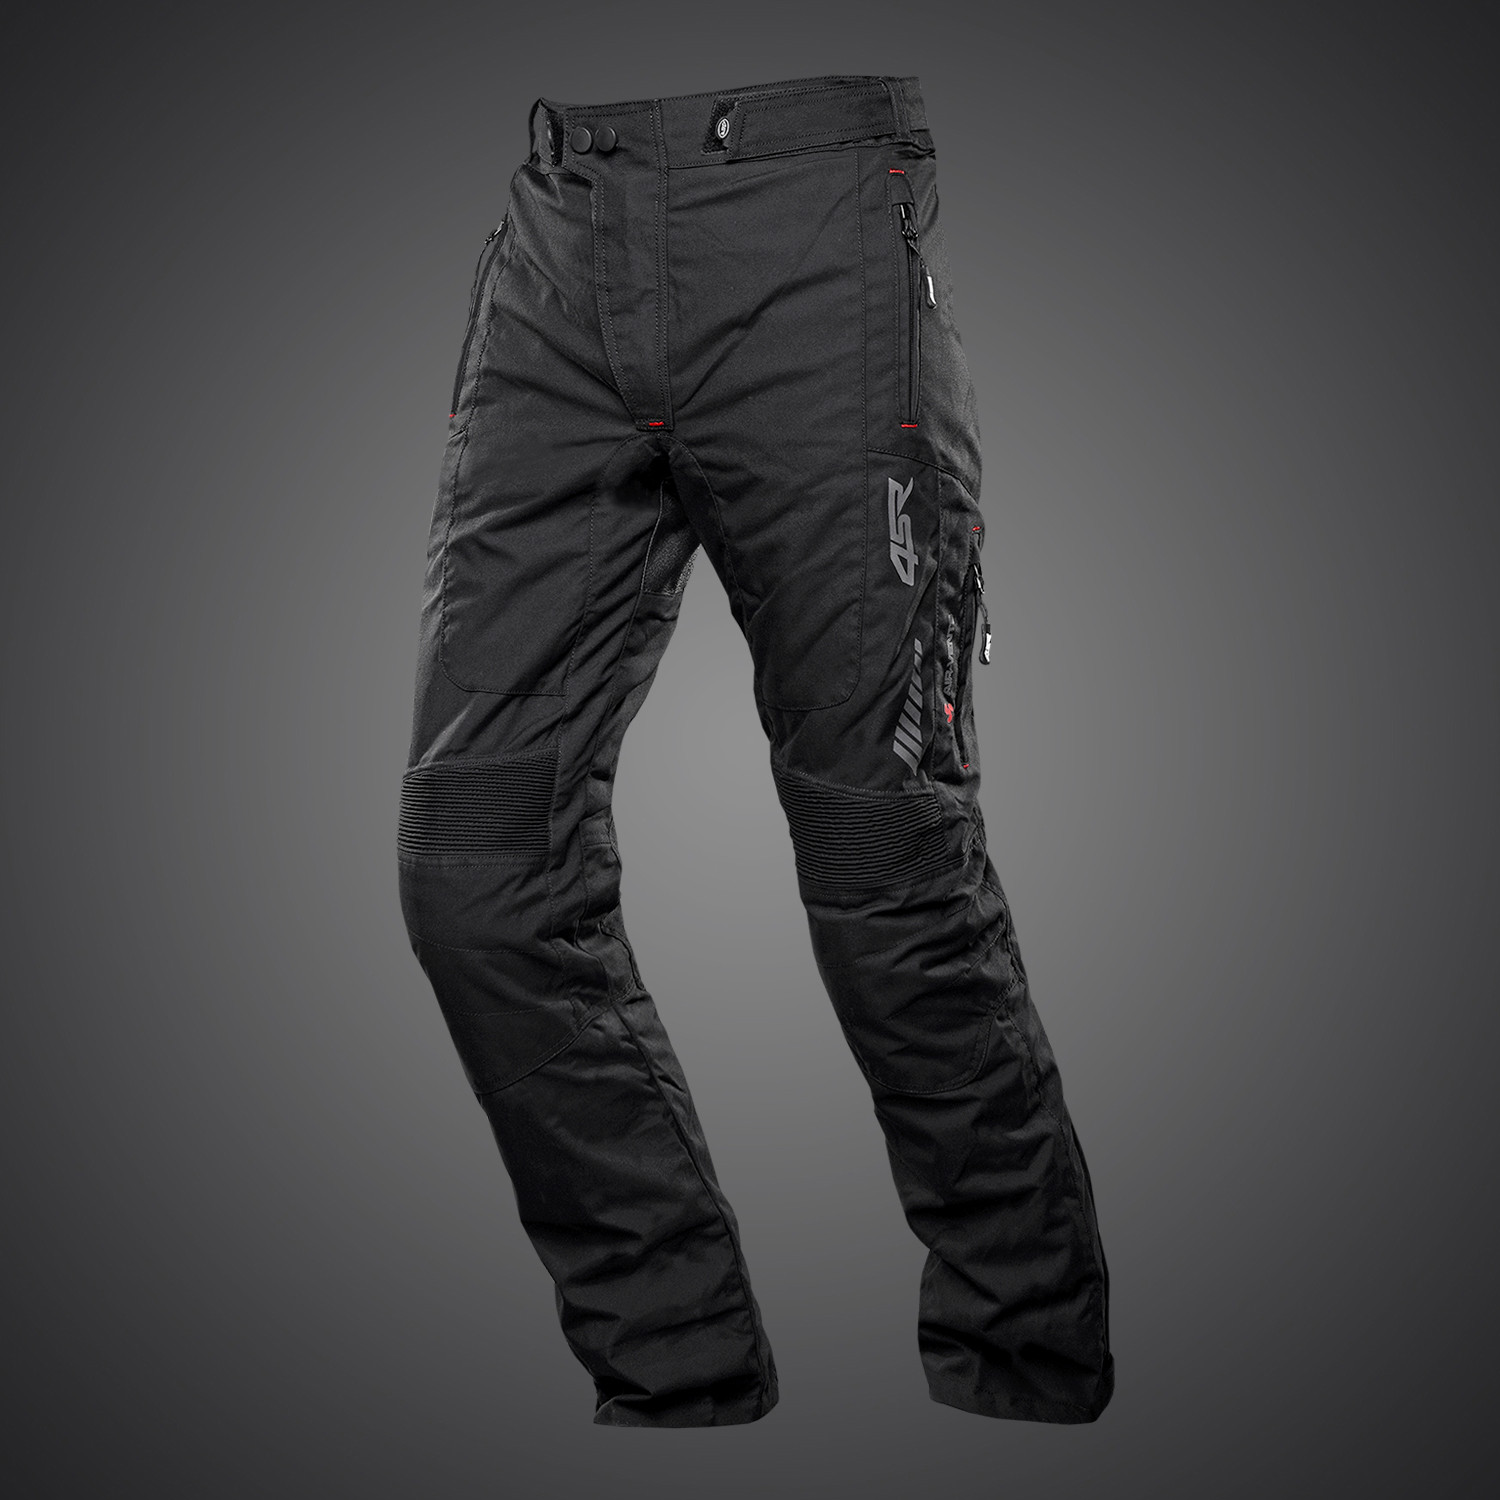 Details 75+ textile motorcycle trousers best - in.duhocakina